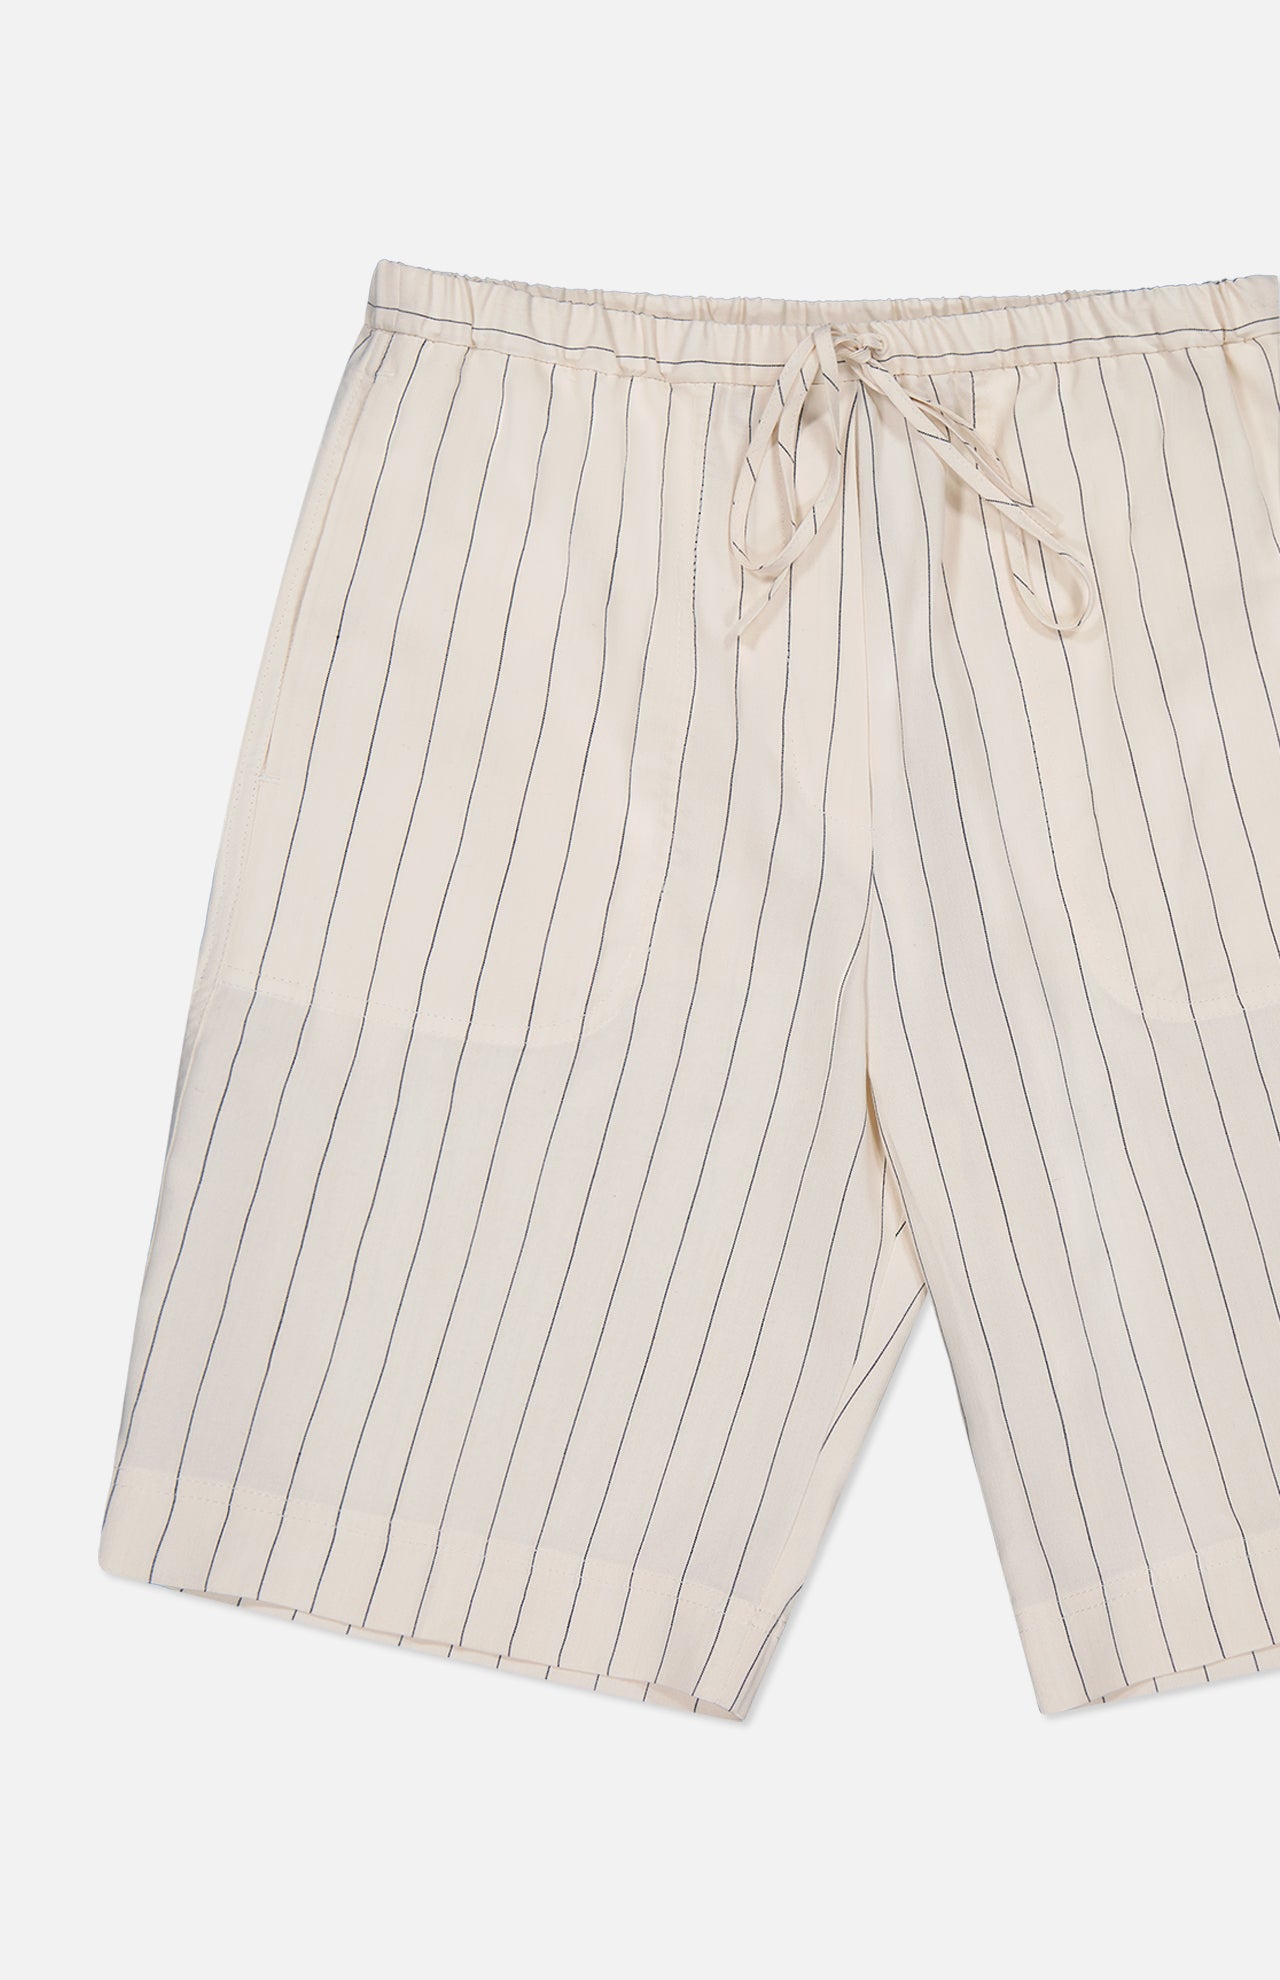 Relaxed Pinstriped Shorts (7406479179891)